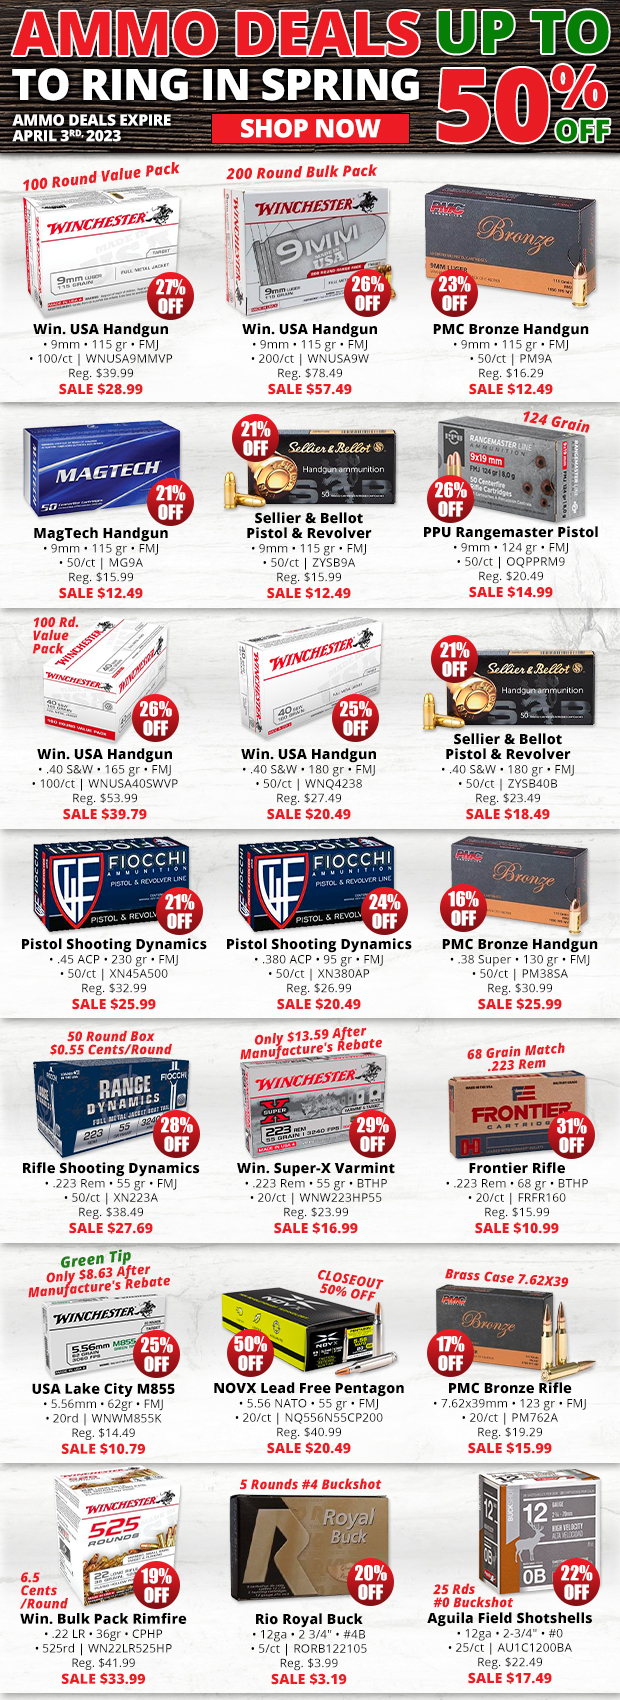 Ring In Spring with Ammo Deals up to 5% Off